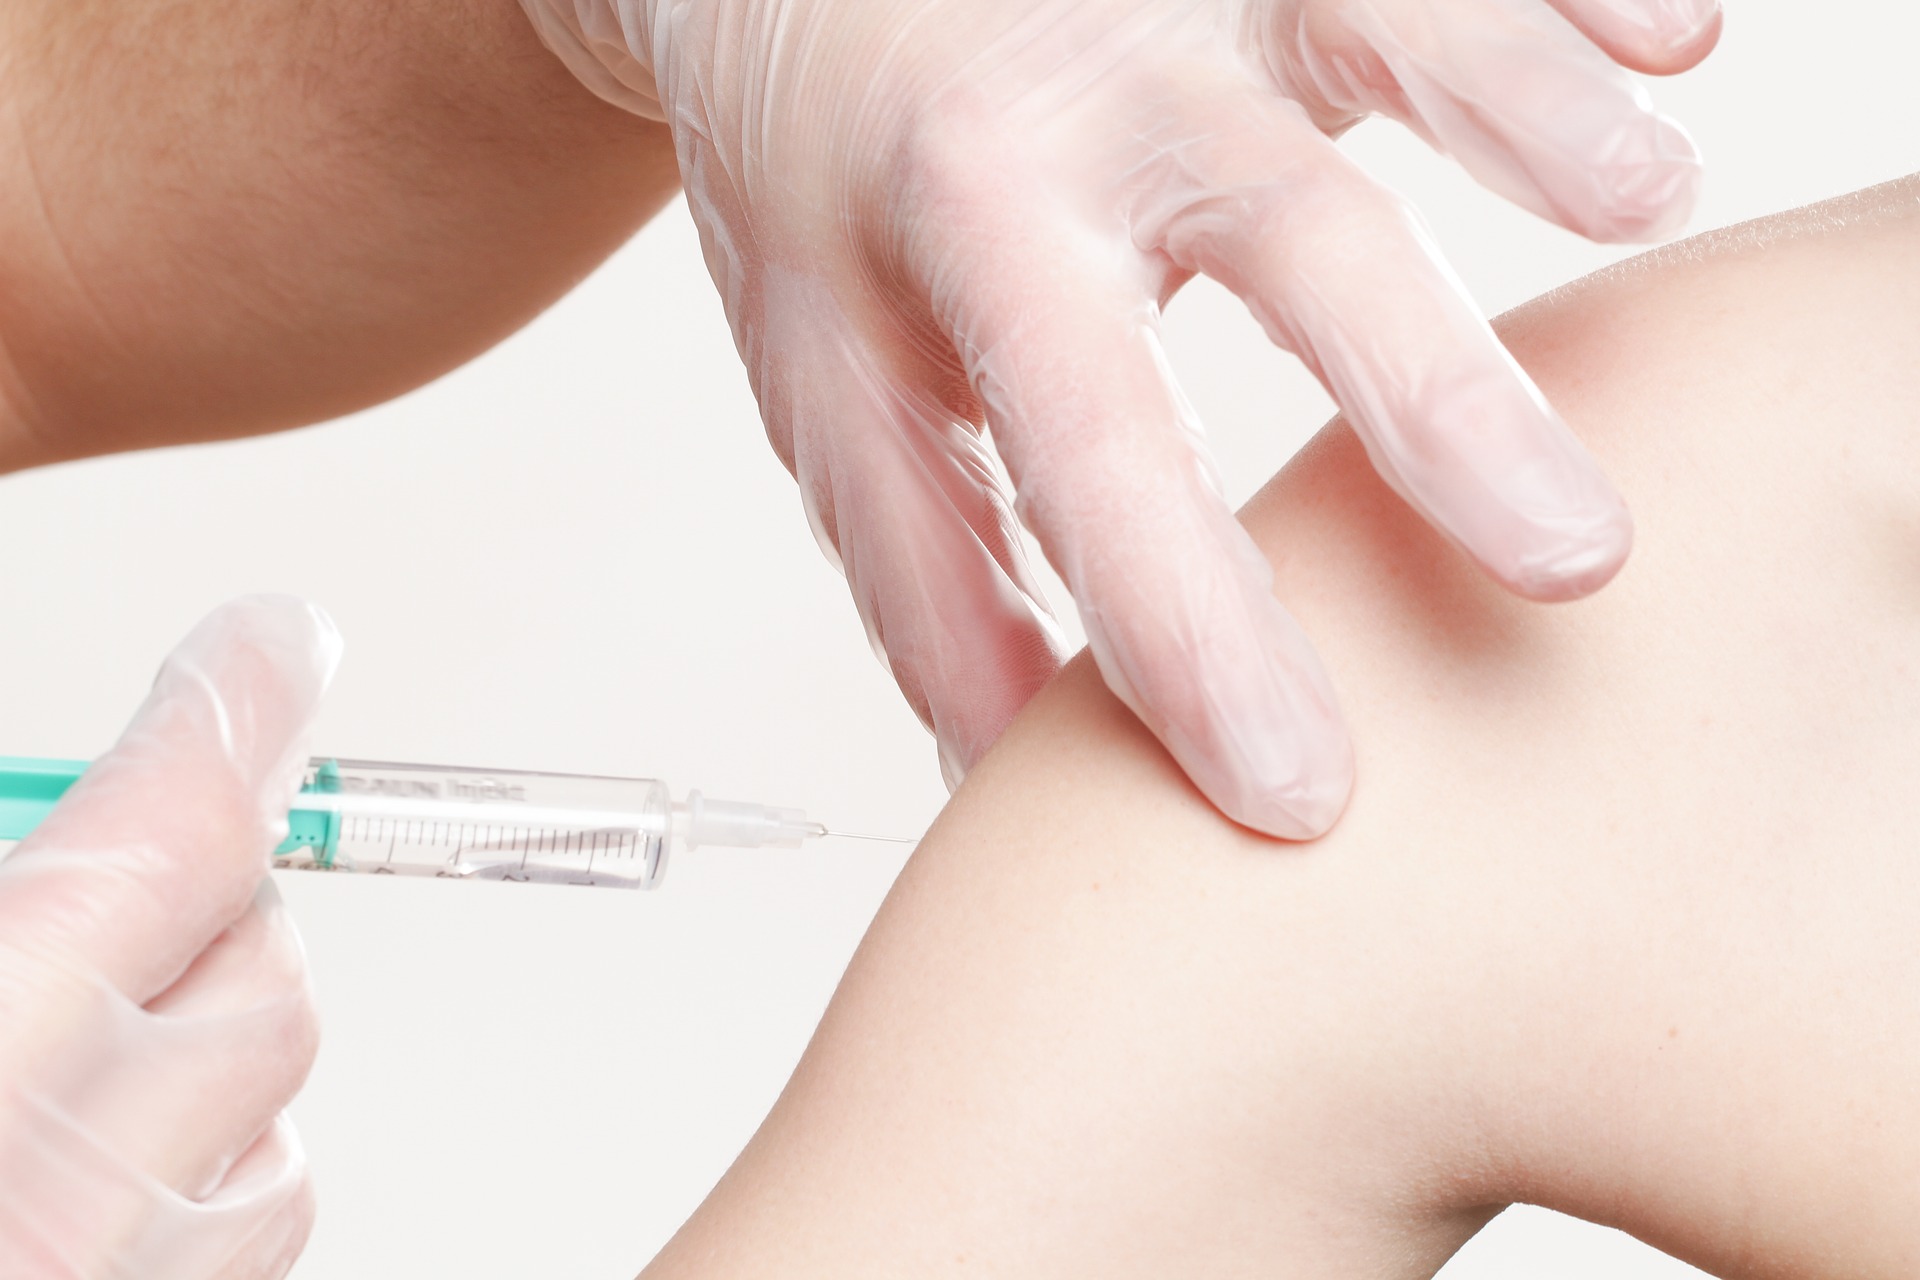 At seven locations, students in grades 4 to 6 will begin receiving Covid-19 vaccinations. (Photo / Retrieved from Pixabay)